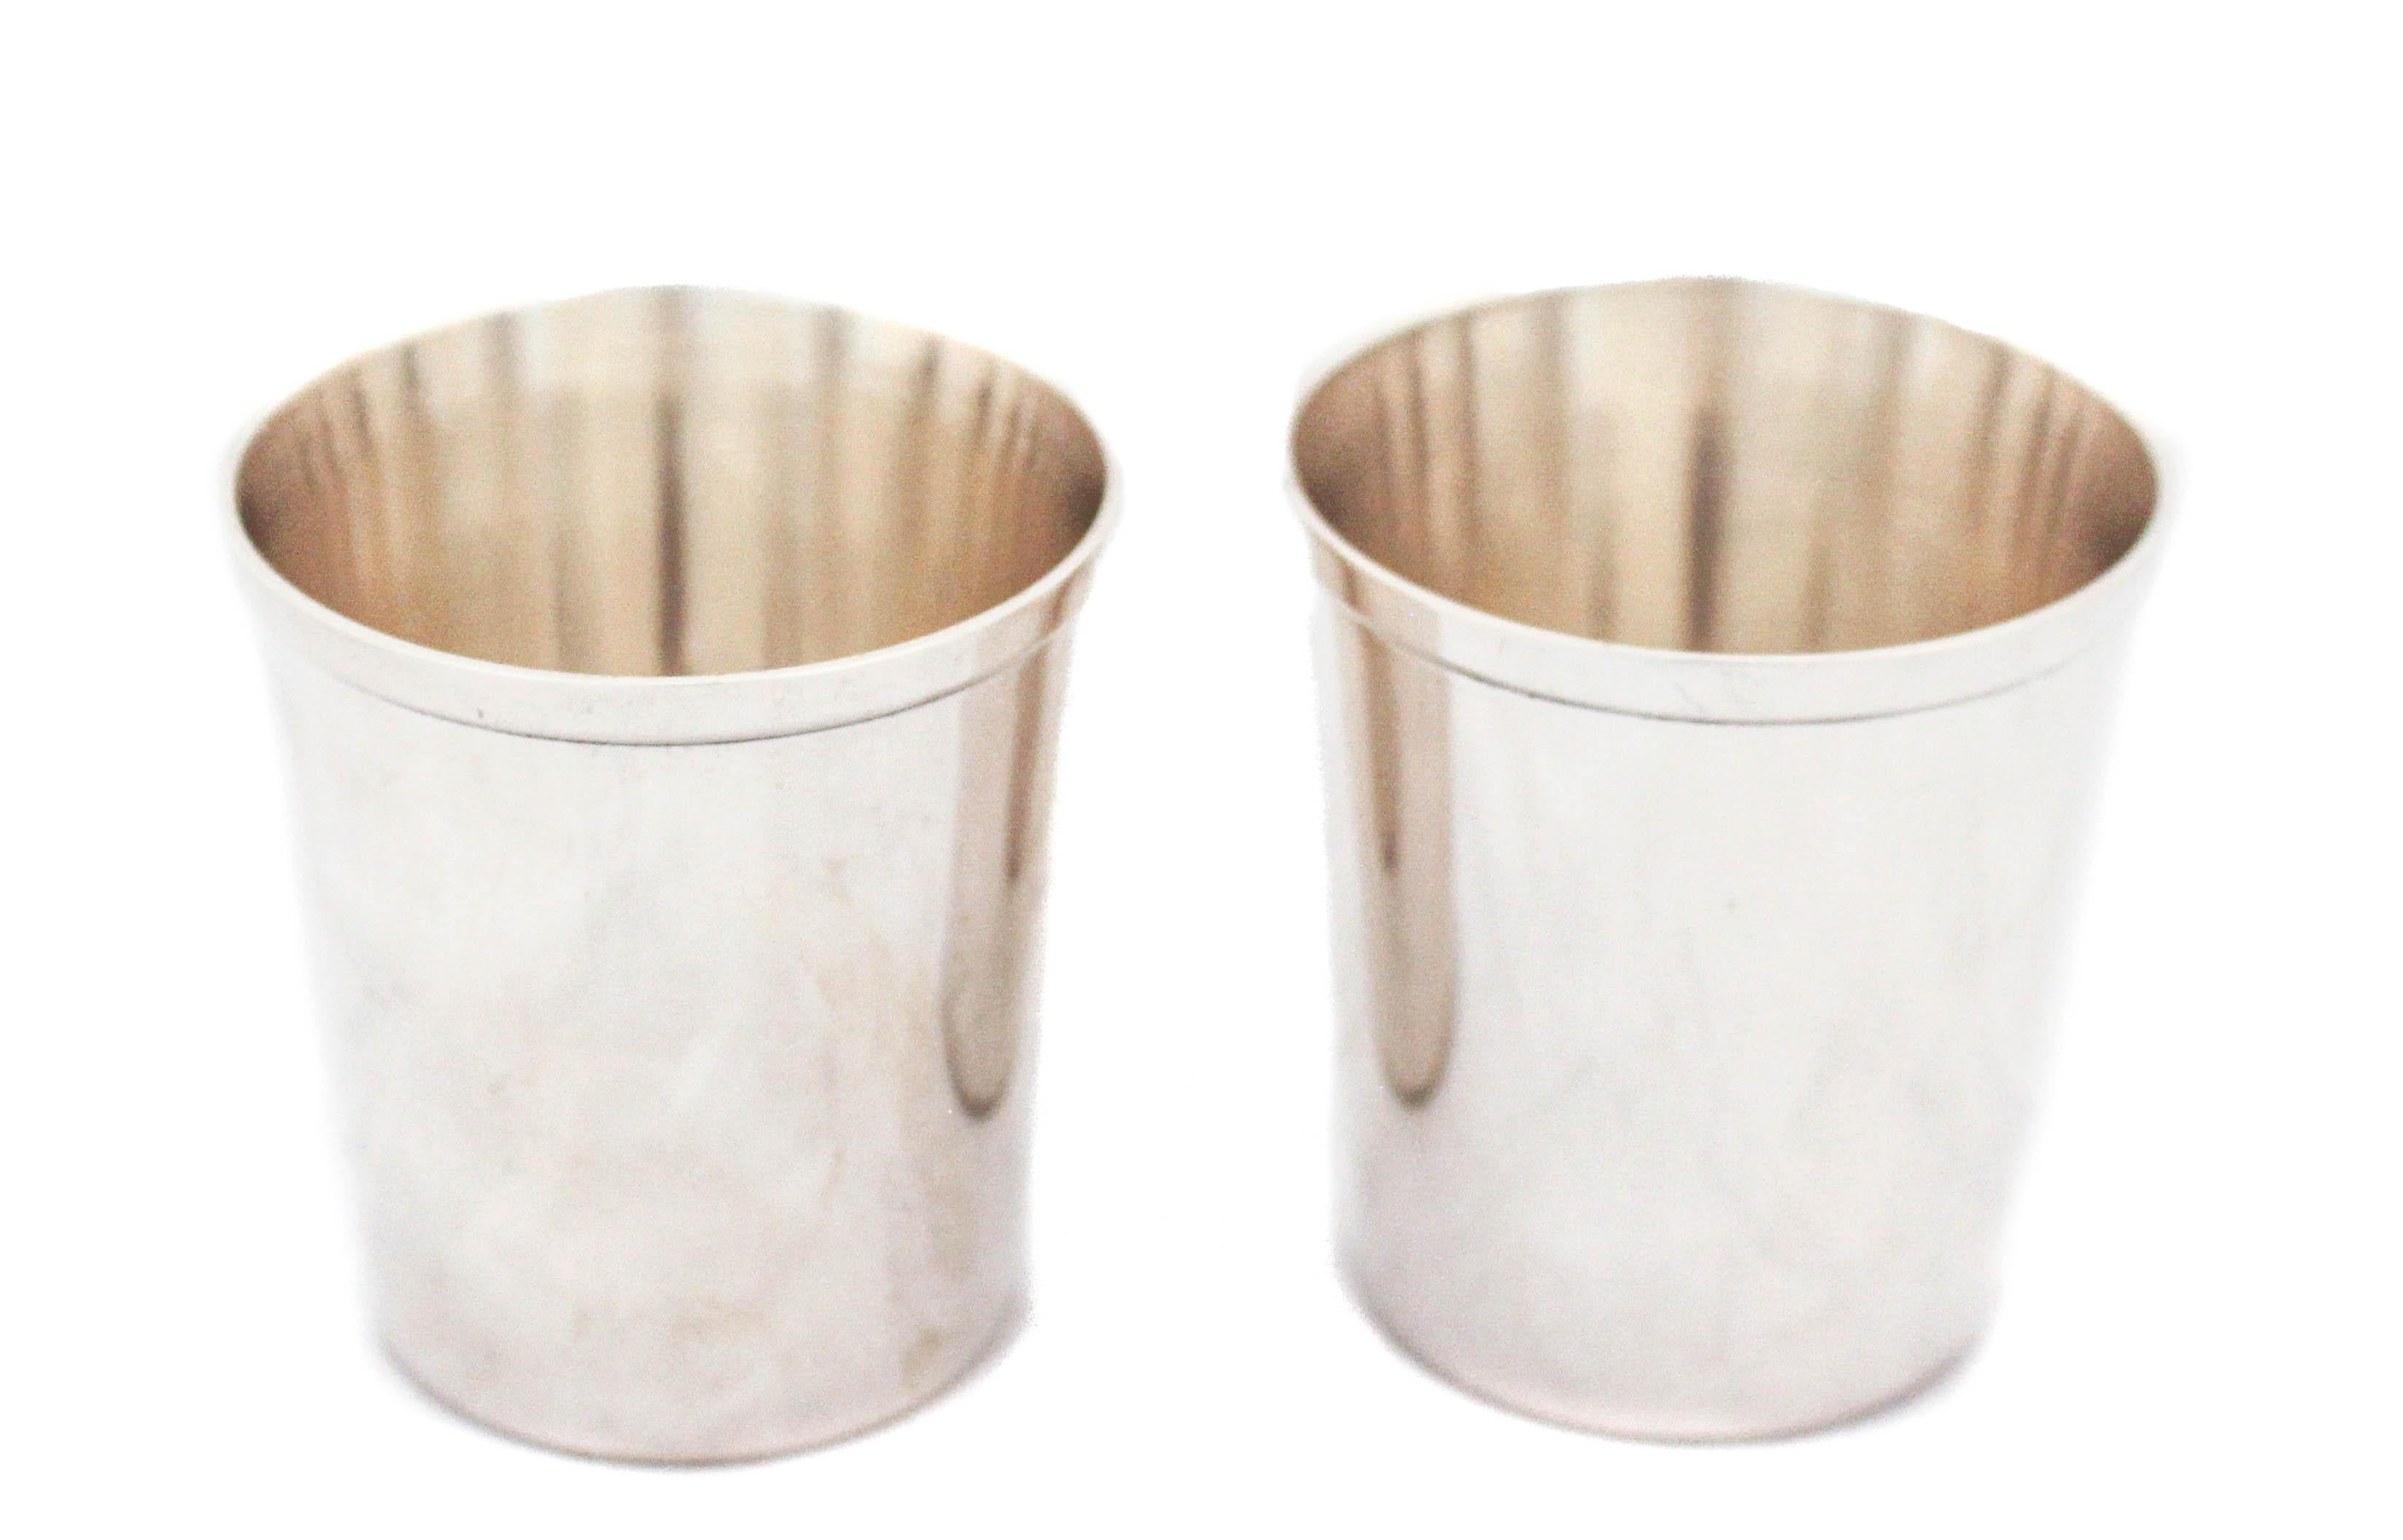 Add this pair of Mid-Century sterling silver tumblers to your bar collection. Designed by the William Durgin Silver Company, they have a sleek understated elegance. Straight lines and no decorative pattern they are masculine and contemporary.